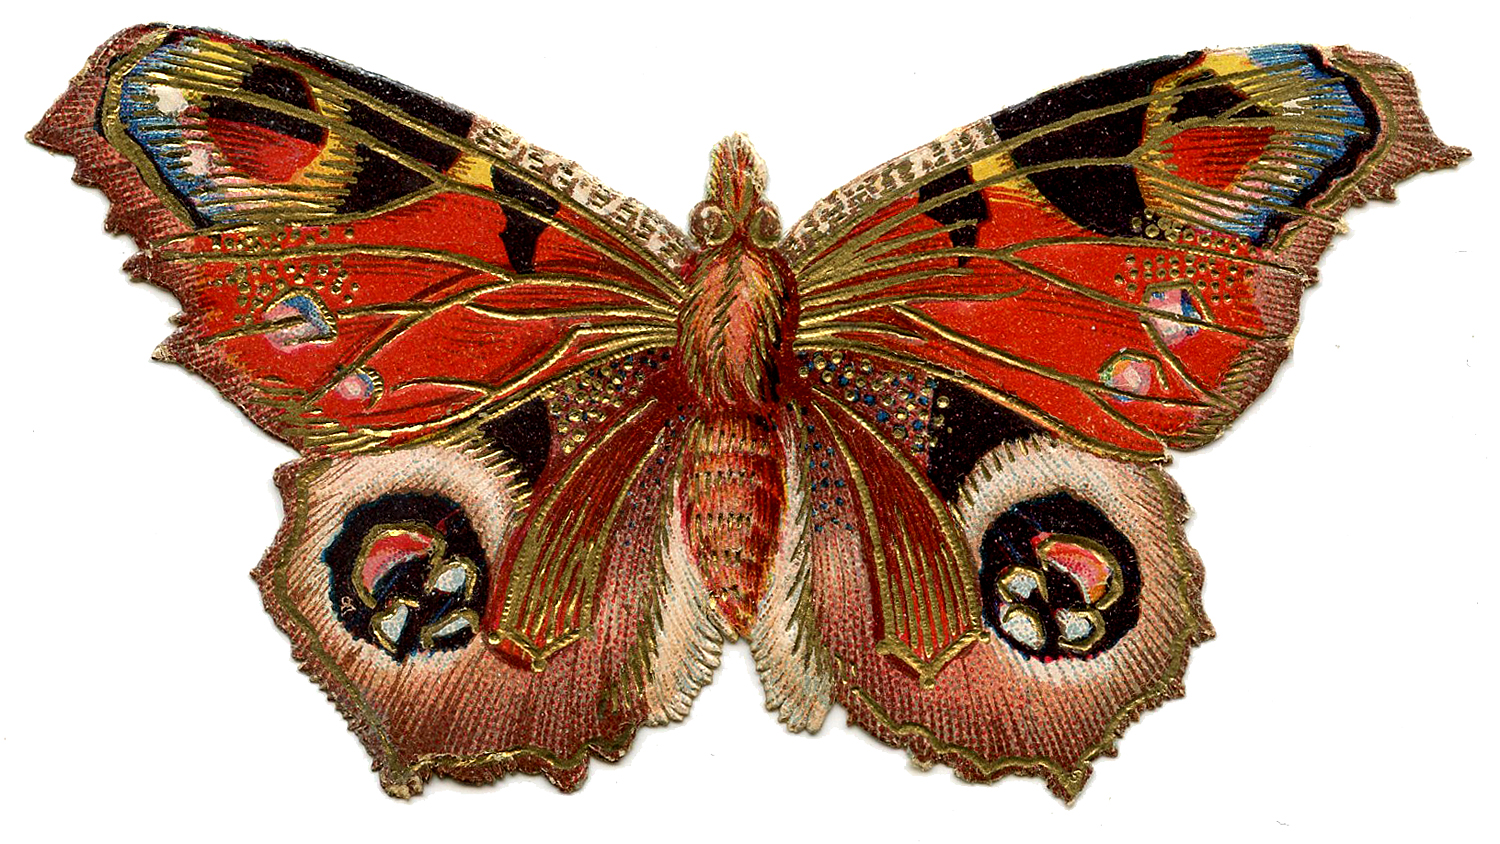 Victorian Graphic - Colorful Butterfly or Moth - The Graphics Fairy